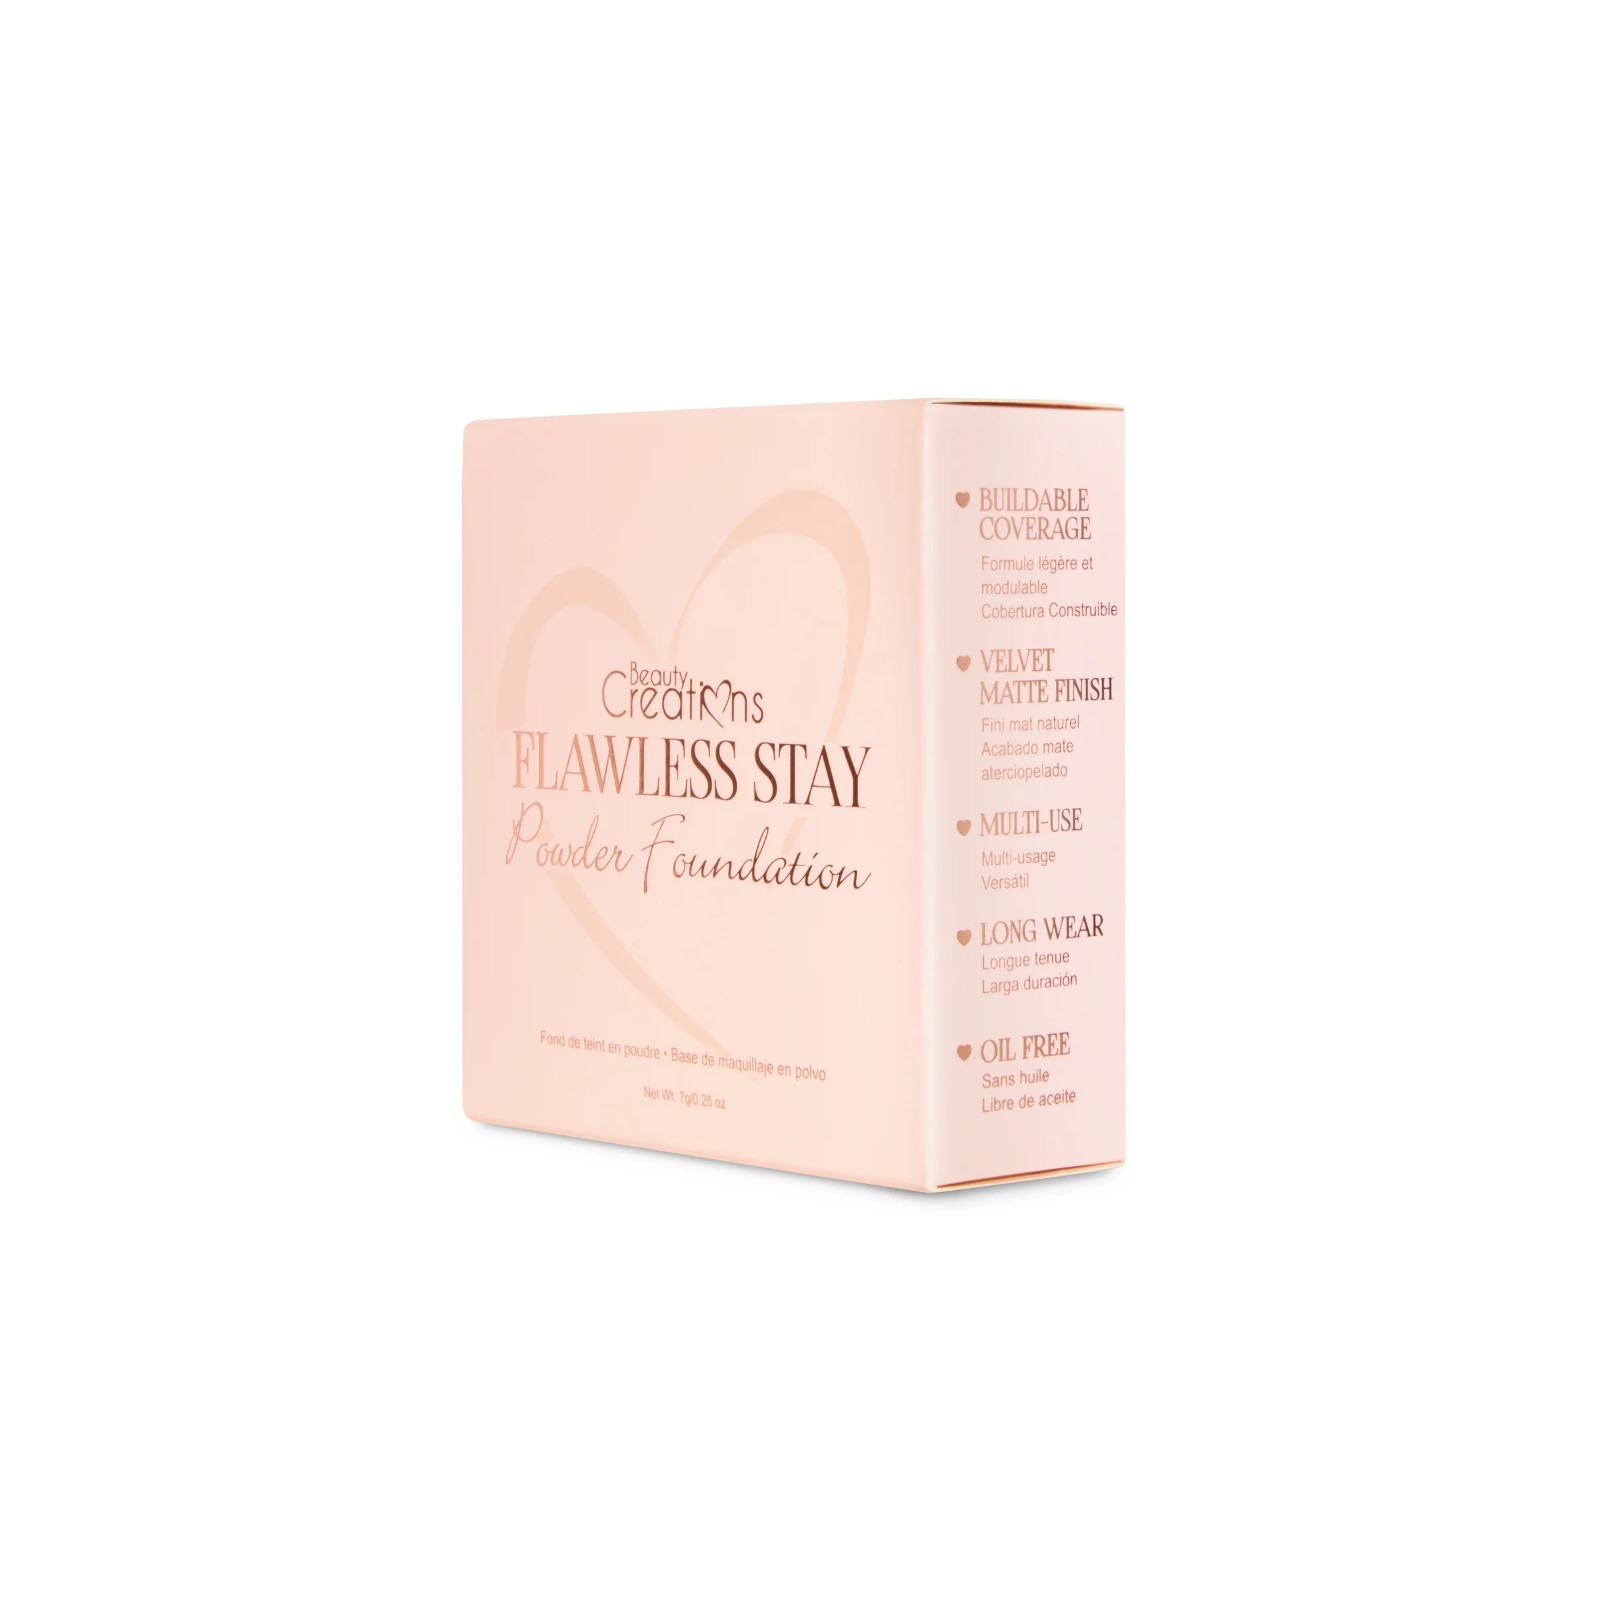 Beauty Creations - Flawless Stay FSP 6.5